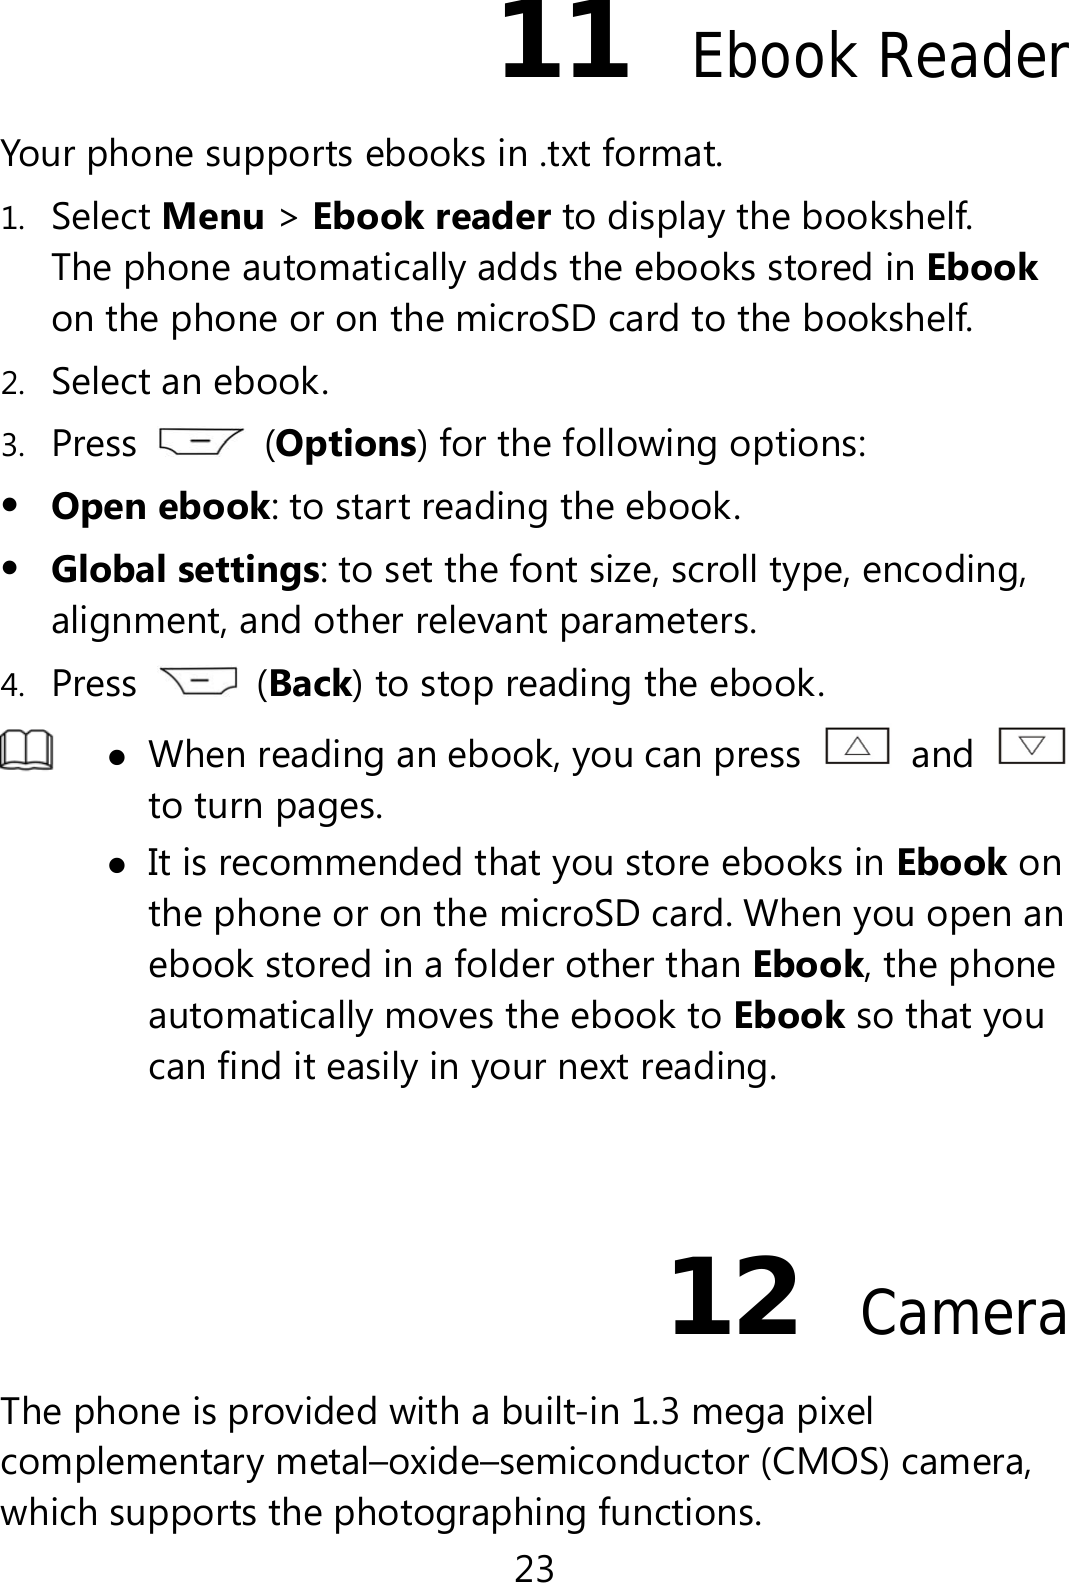 23 11  Ebook Reader Your phone supports ebooks in .txt format. 1. Select Menu &gt; Ebook reader to display the bookshelf. The phone automatically adds the ebooks stored in Ebook on the phone or on the microSD card to the bookshelf. 2. Select an ebook. 3. Press   (Options) for the following options:  Open ebook: to start reading the ebook.  Global settings: to set the font size, scroll type, encoding, alignment, and other relevant parameters. 4. Press   (Back) to stop reading the ebook.   When reading an ebook, you can press   and to turn pages.    It is recommended that you store ebooks in Ebook on the phone or on the microSD card. When you open an ebook stored in a folder other than Ebook, the phone automatically moves the ebook to Ebook so that you can find it easily in your next reading.  12  Camera The phone is provided with a built-in 1.3 mega pixel complementary metal–oxide–semiconductor (CMOS) camera, which supports the photographing functions. 